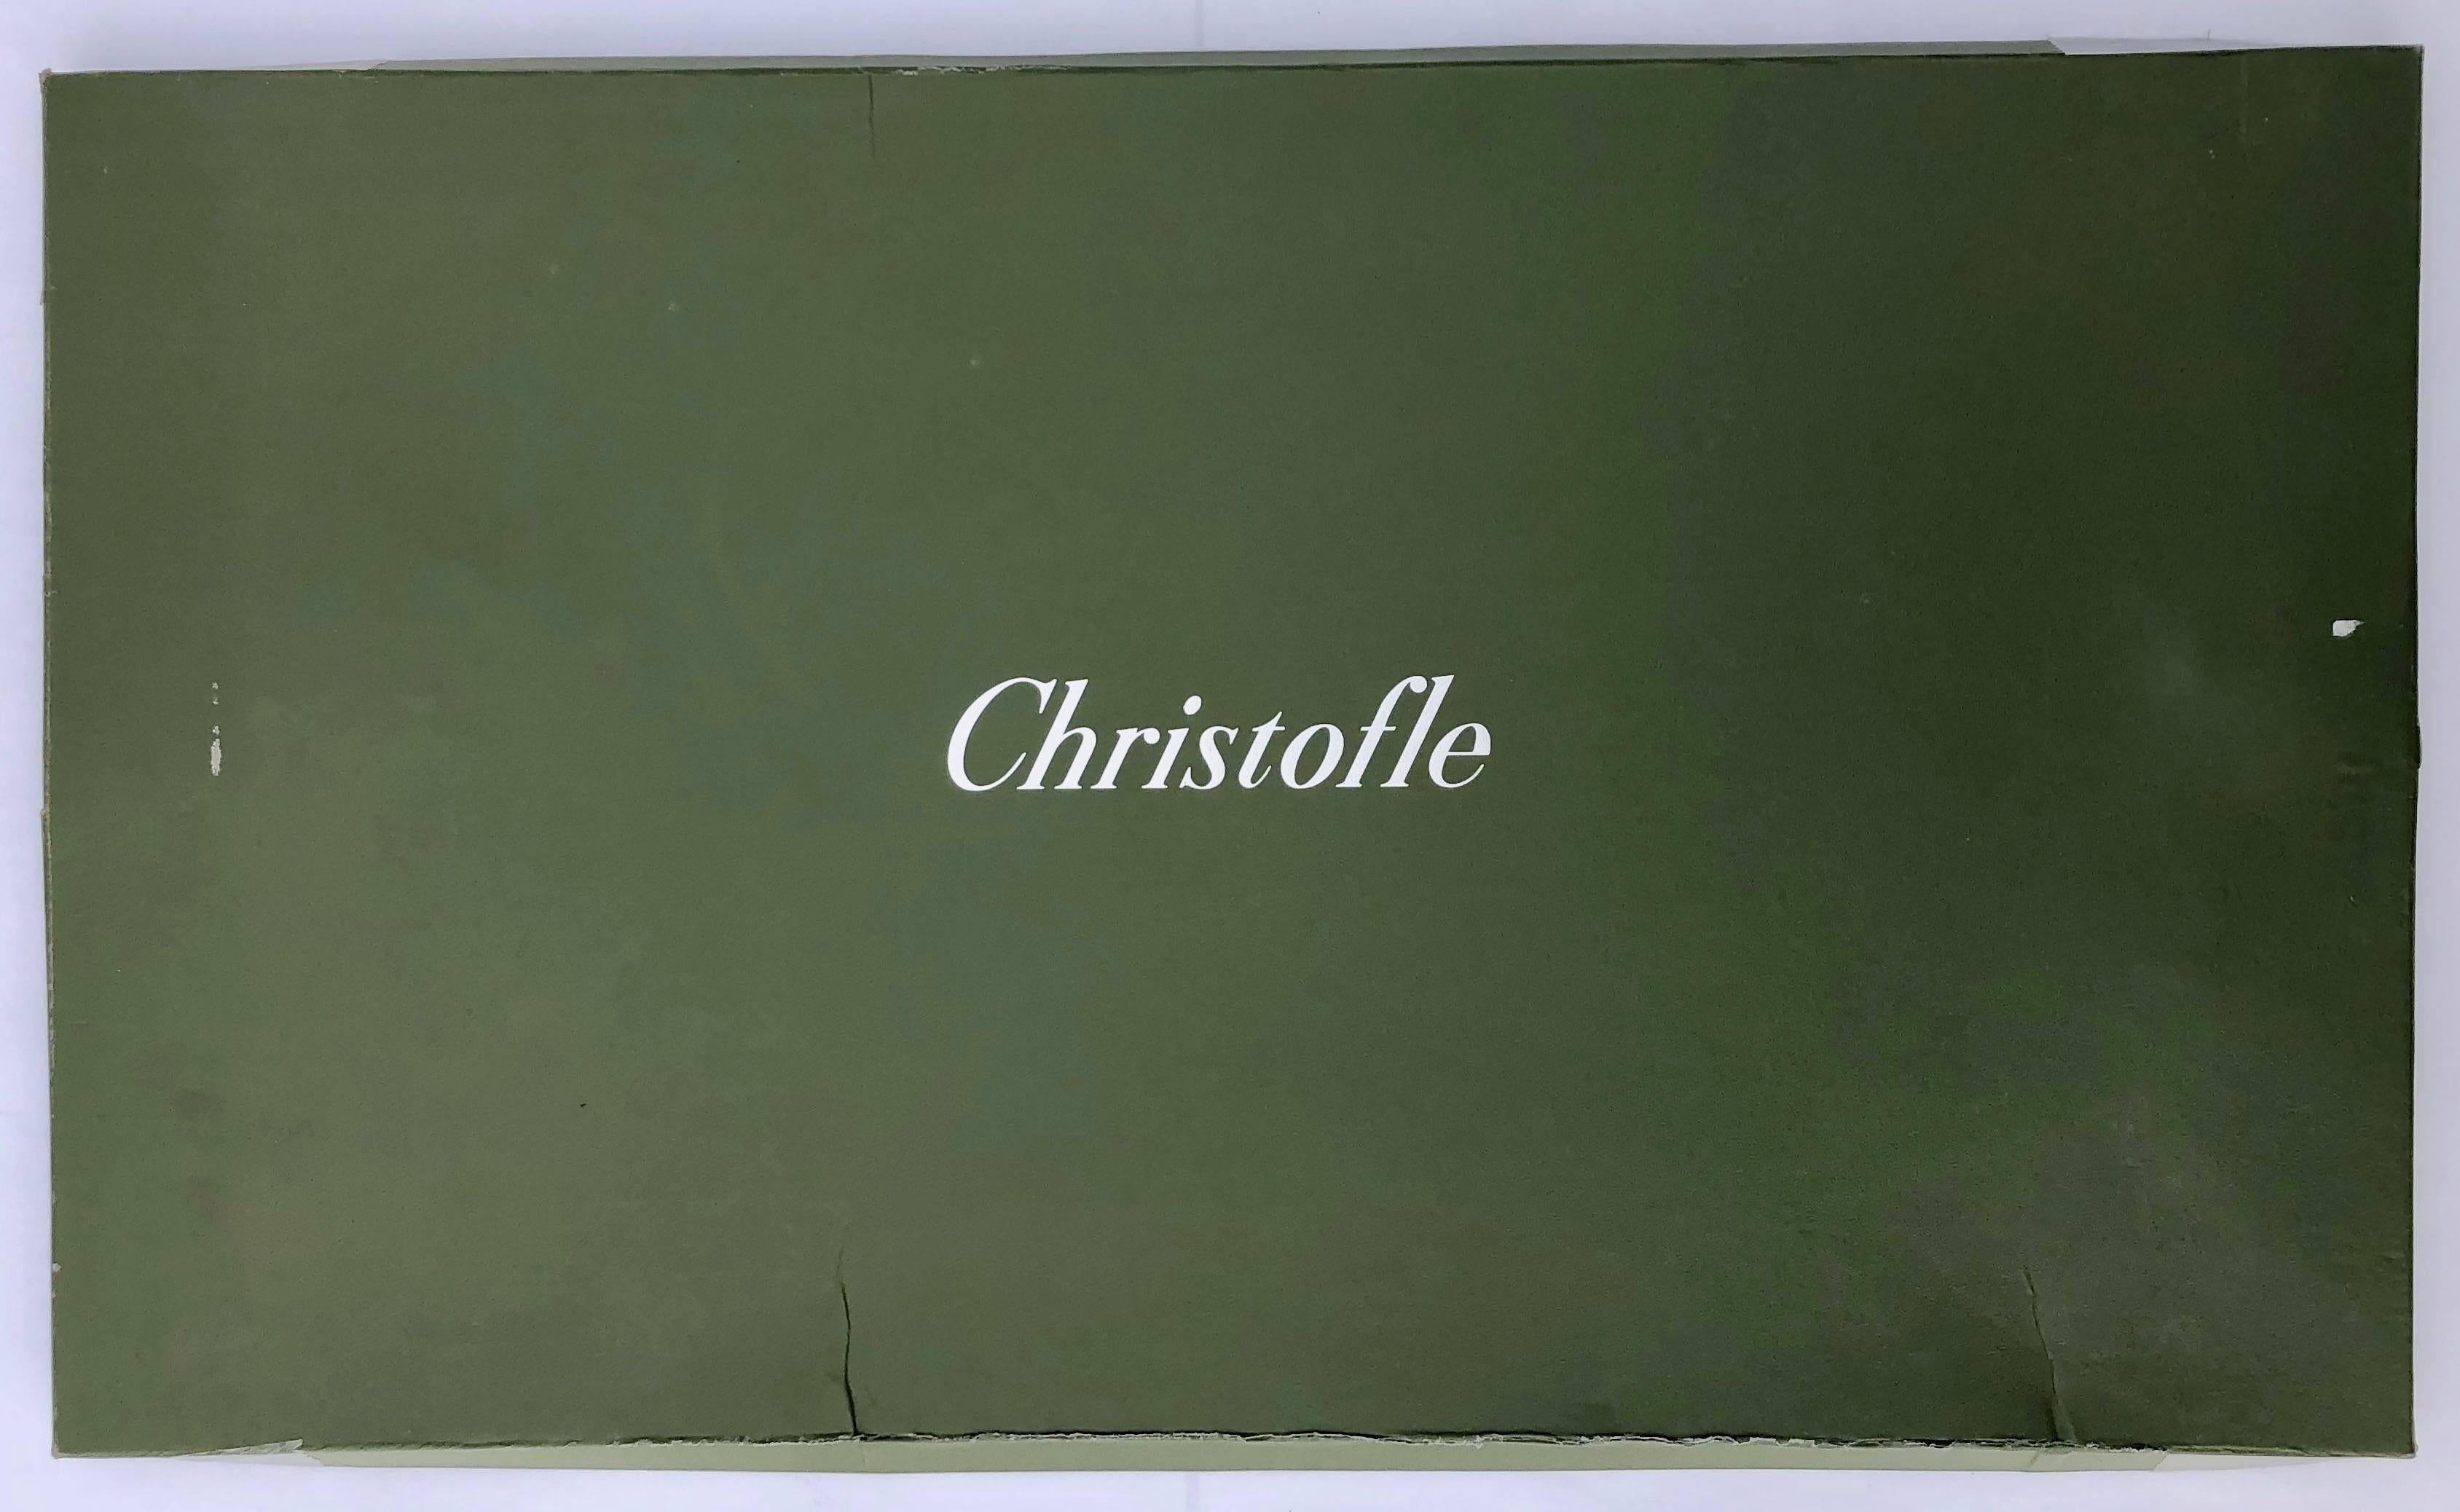 Christofle Silver Plated Rectangular Tray Carnavalet In Excellent Condition For Sale In Petaluma, CA